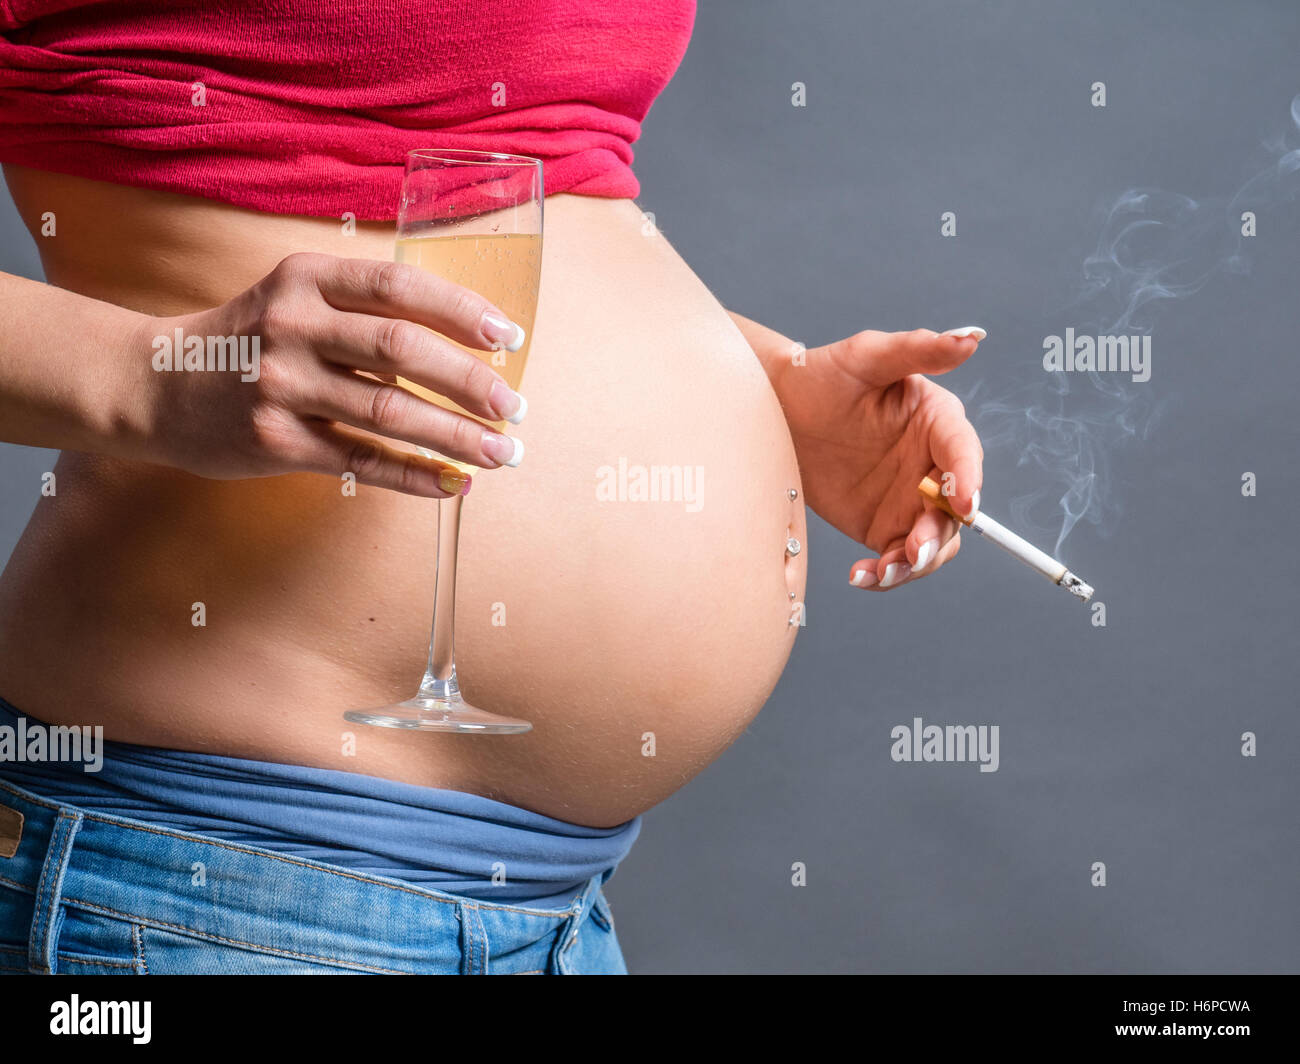 pregnant woman smoking cigarette and drinking Alcohol. unhealthy habits Stock Photo